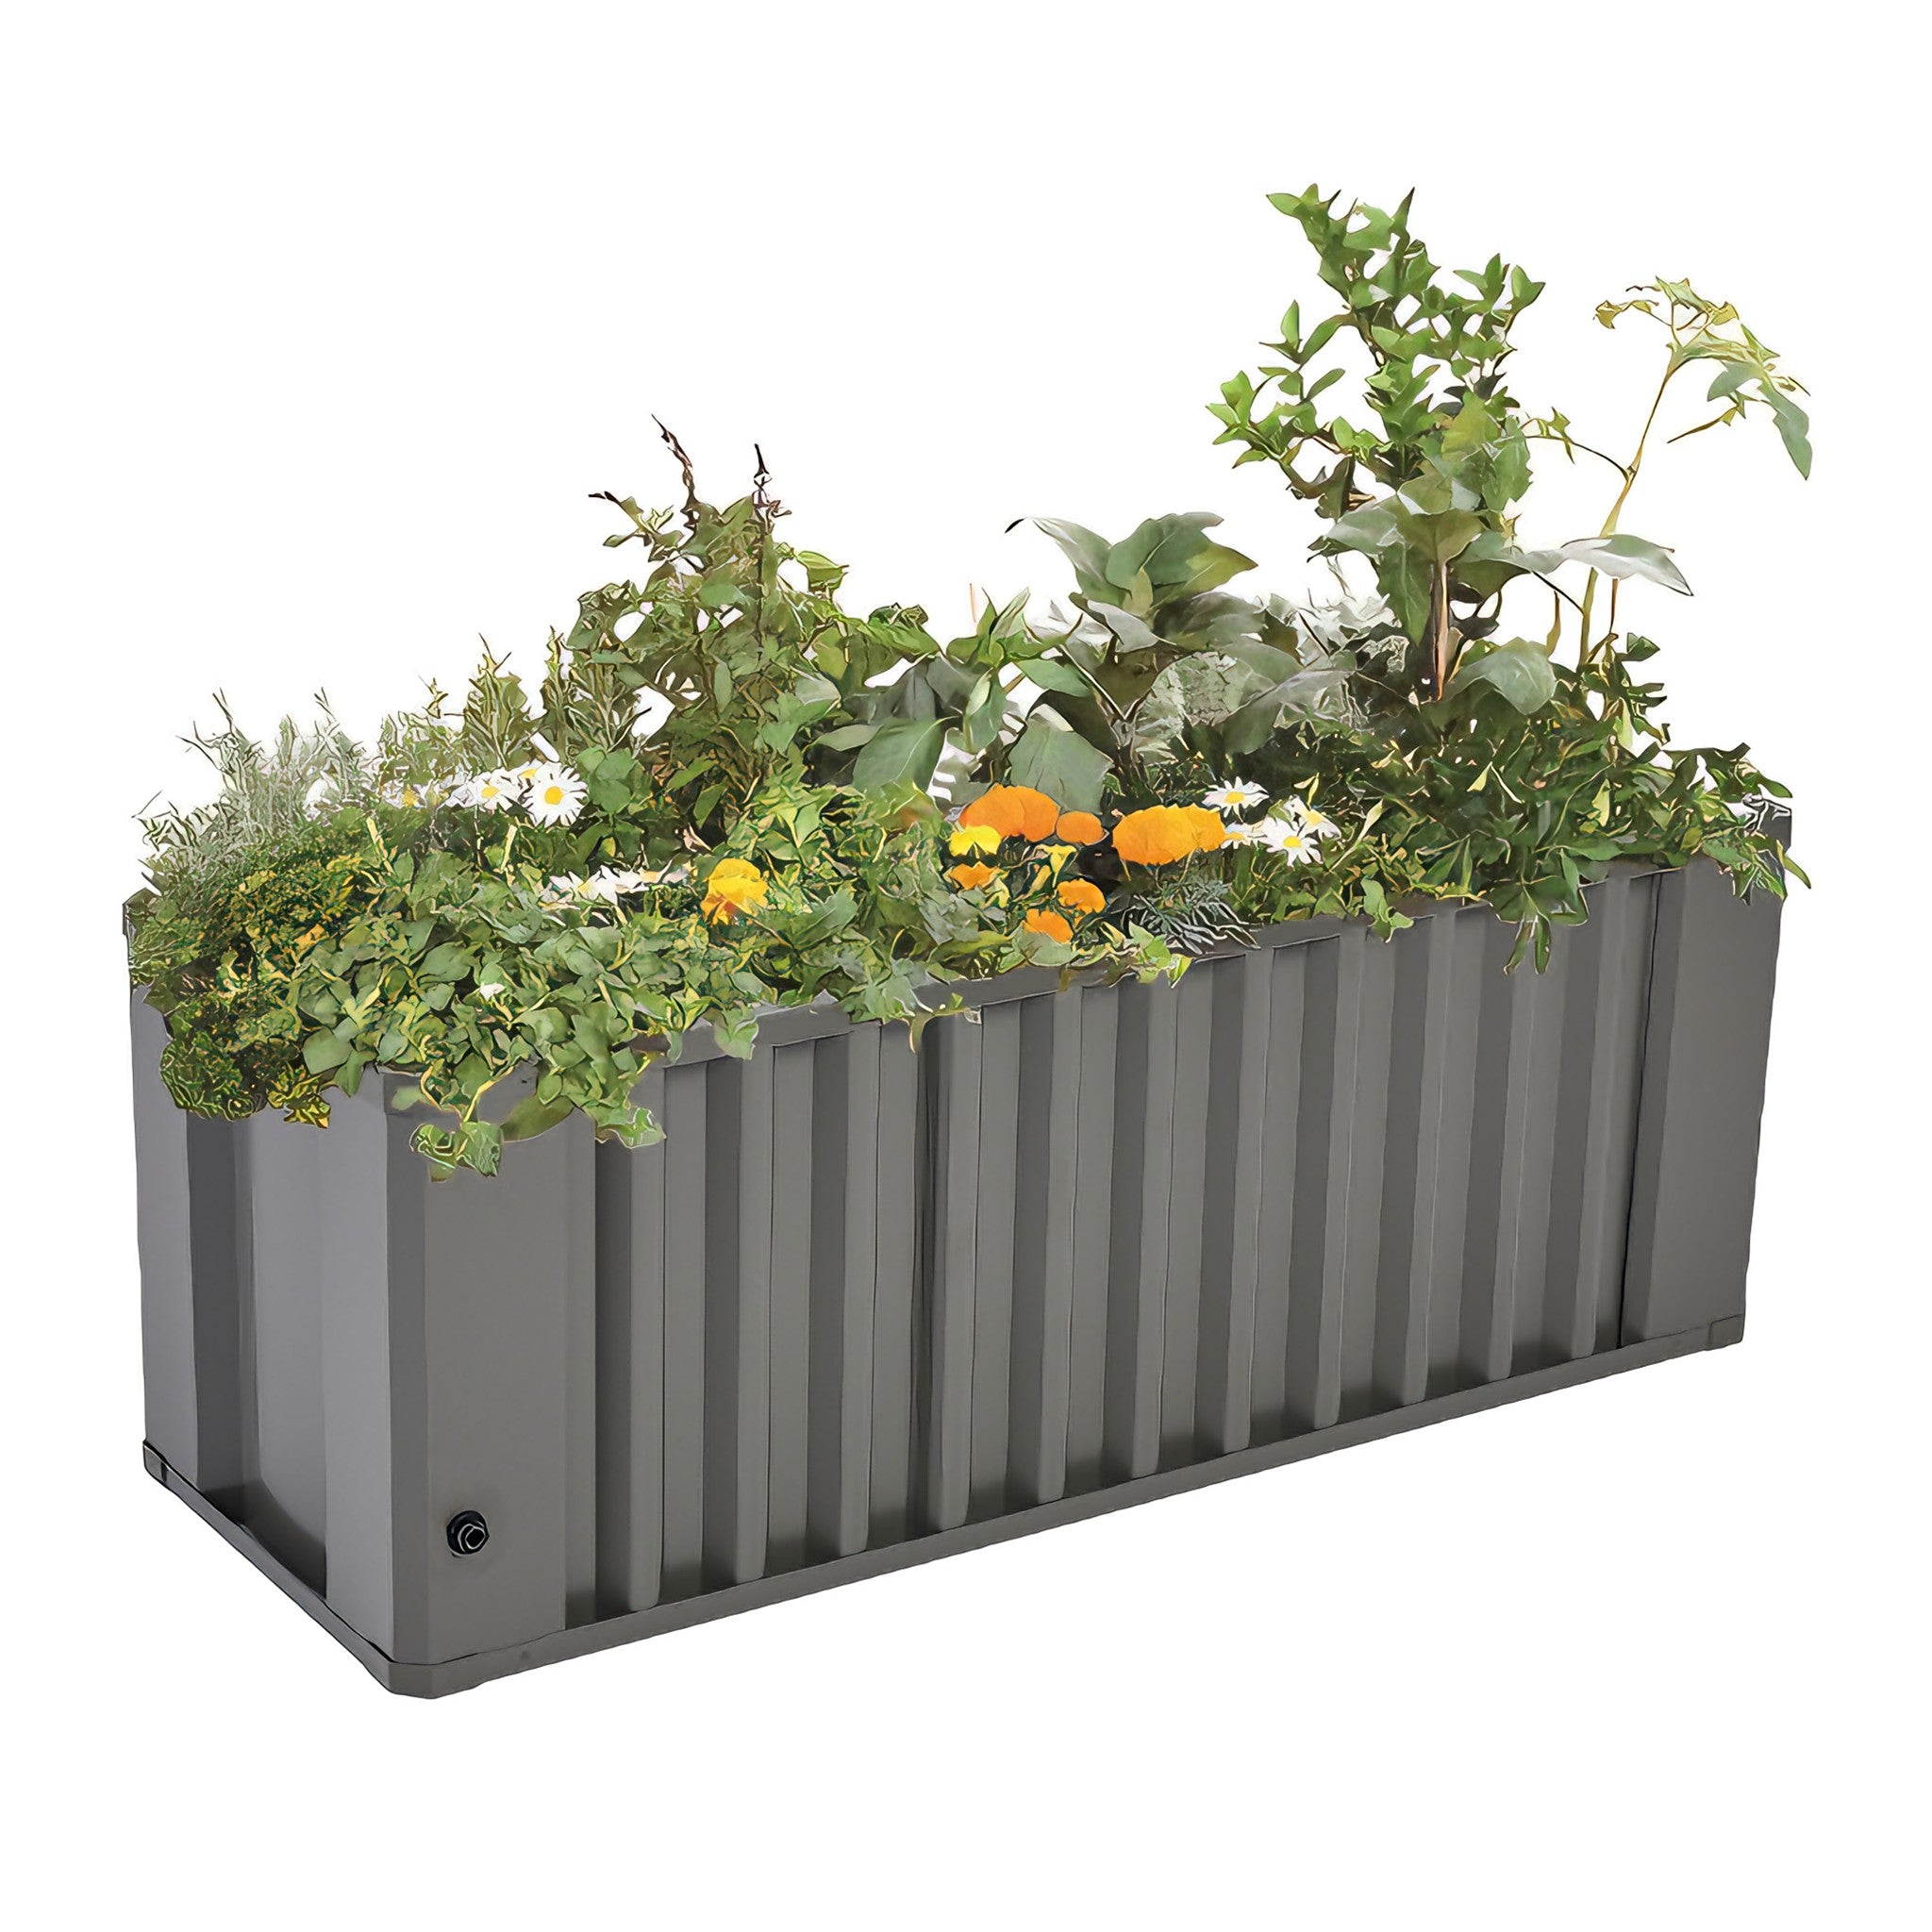 WaterUps Oasis 1240 wicking bed